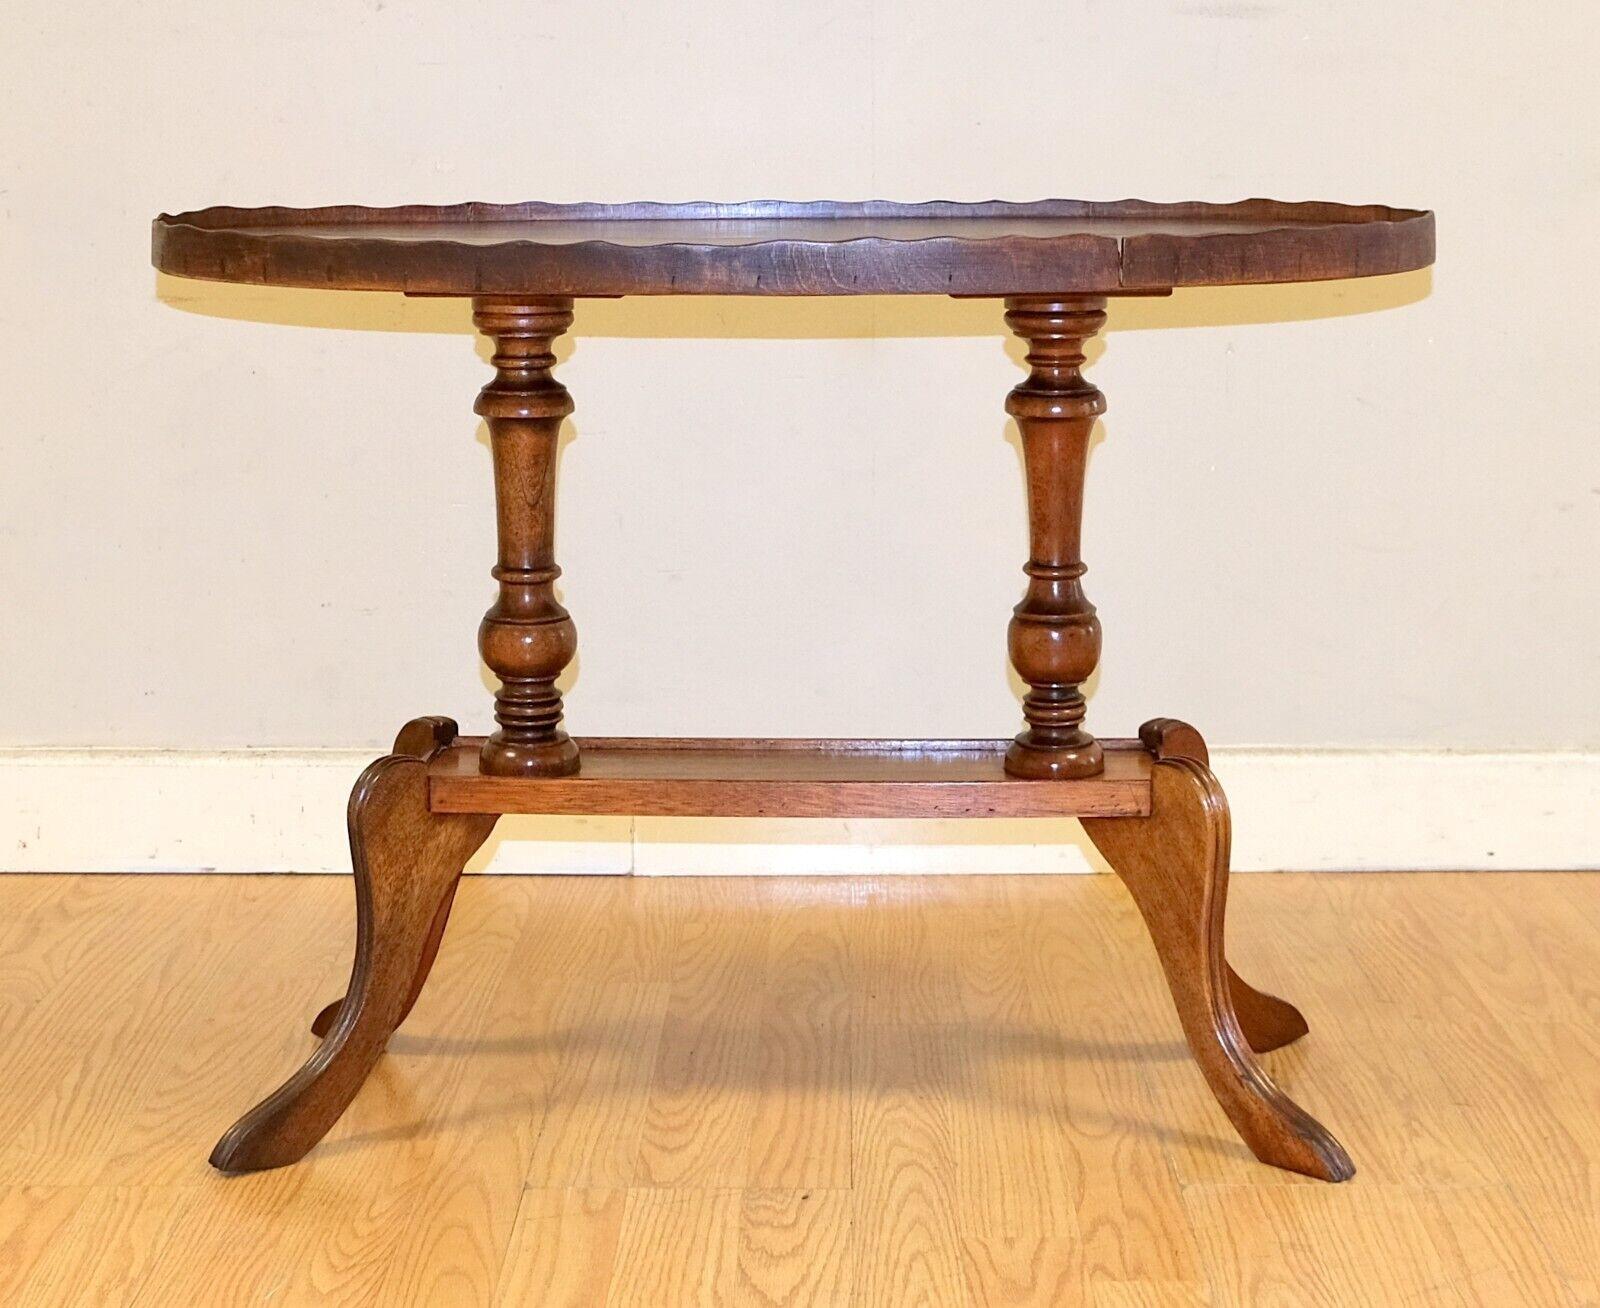 We are delighted to offer for sale this lovely Antique Regency style Yew oval pie crust edge coffee table on sabre legs. 

A good looking and attractive coffee table with a lovely patina that will compliment any setting. Classic regency style with